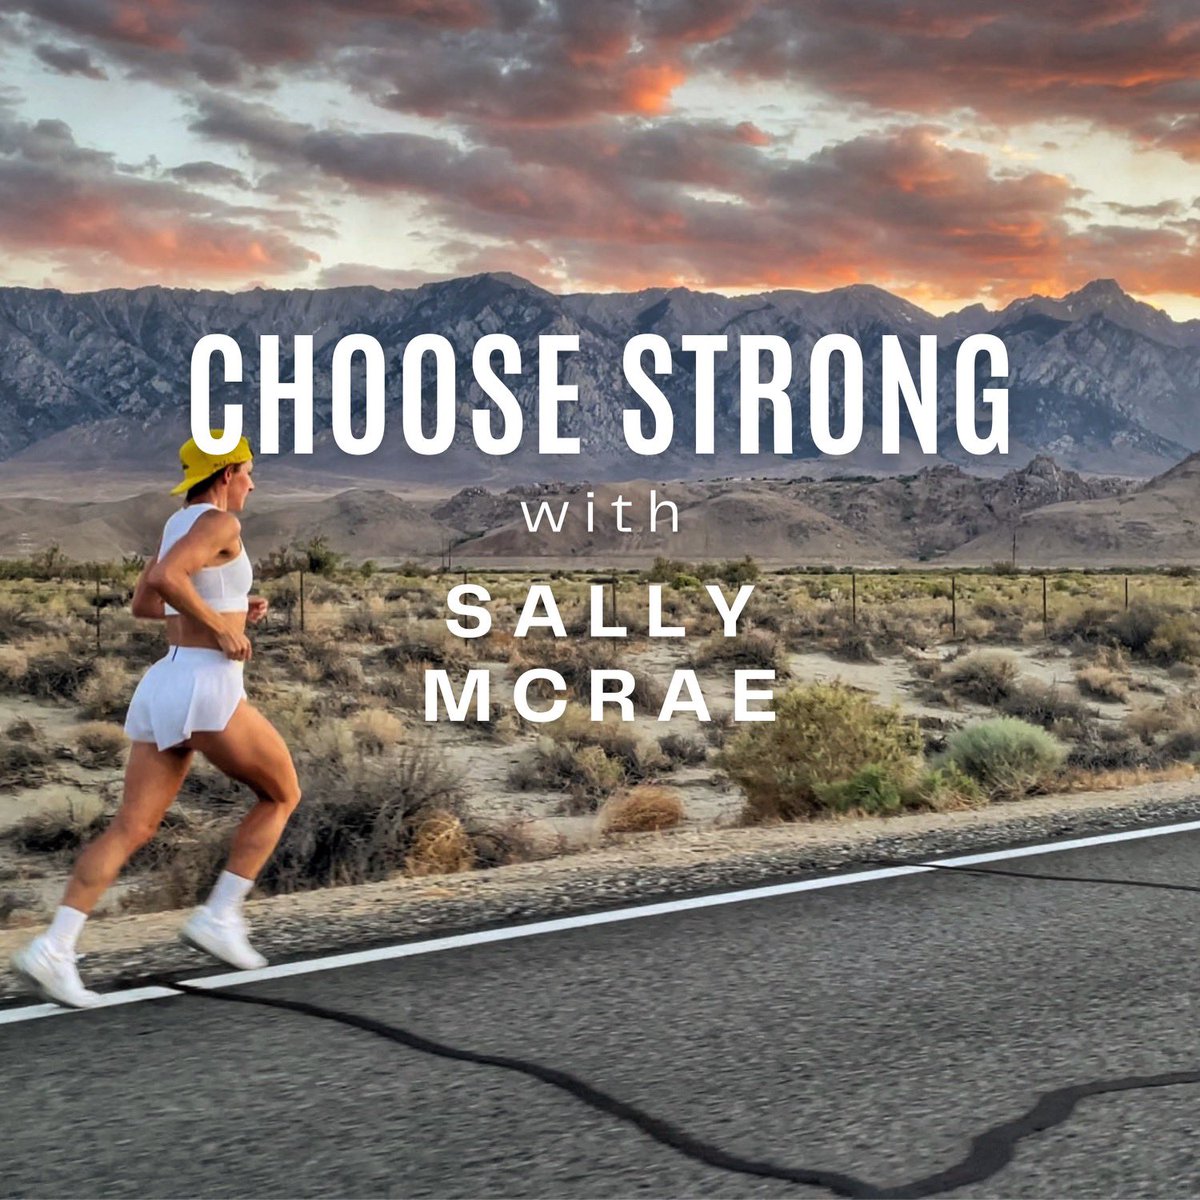 Listen to the most recent episode of my podcast: Training your Body & Mind (The Body Part 3) anchor.fm/sallymcraepodc…